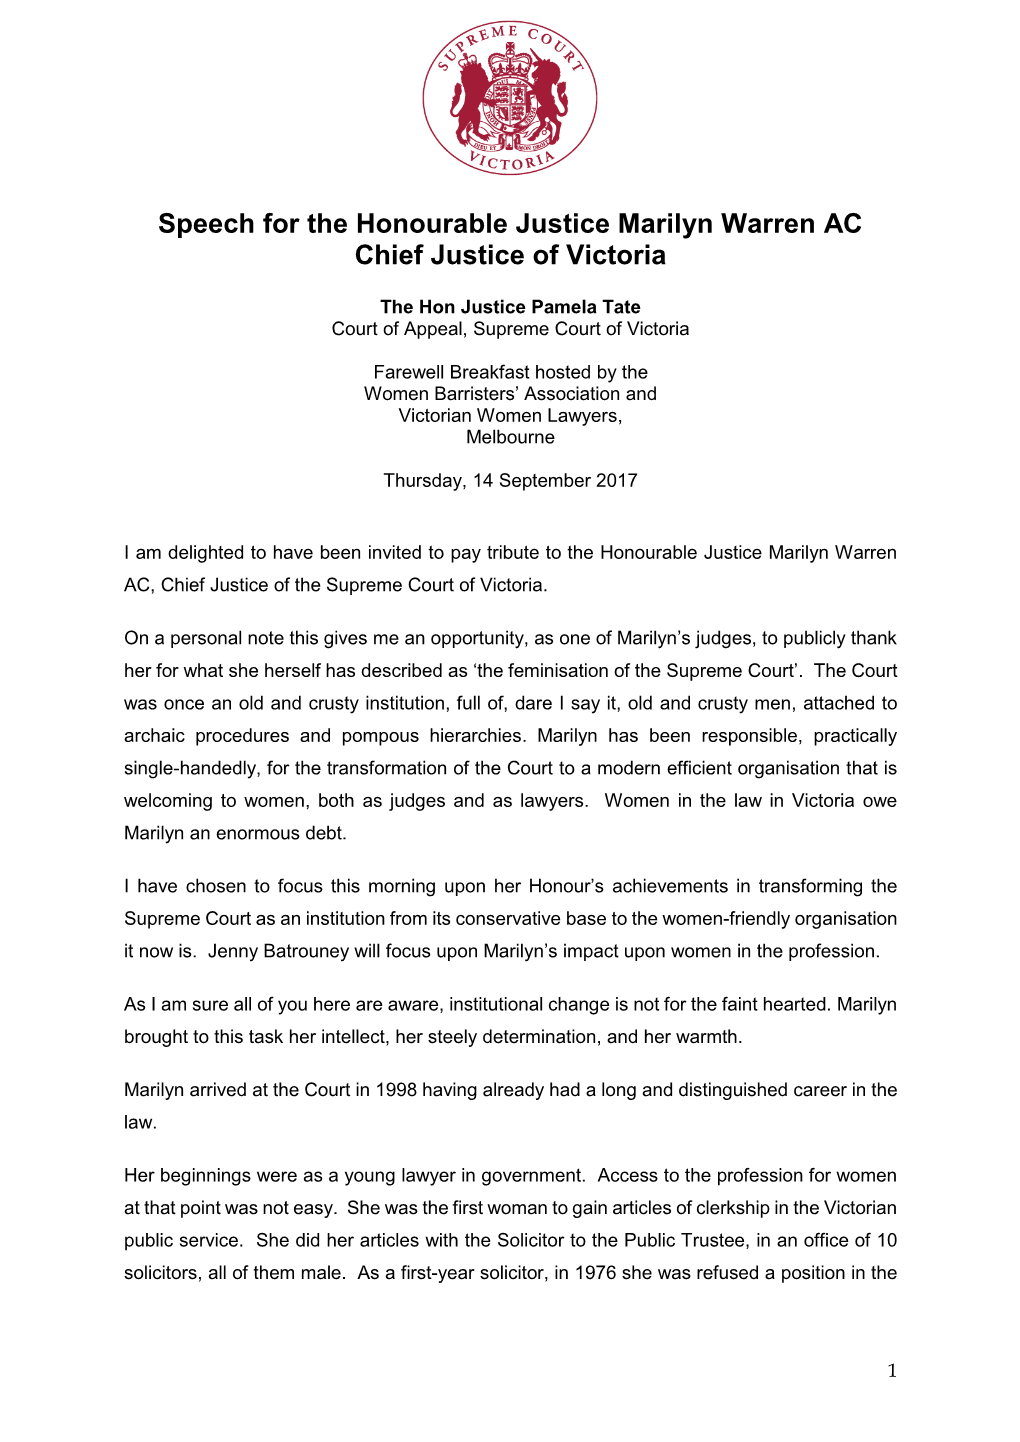 Speech for the Honourable Marilyn Warren AC, Chief Justice of Victoria